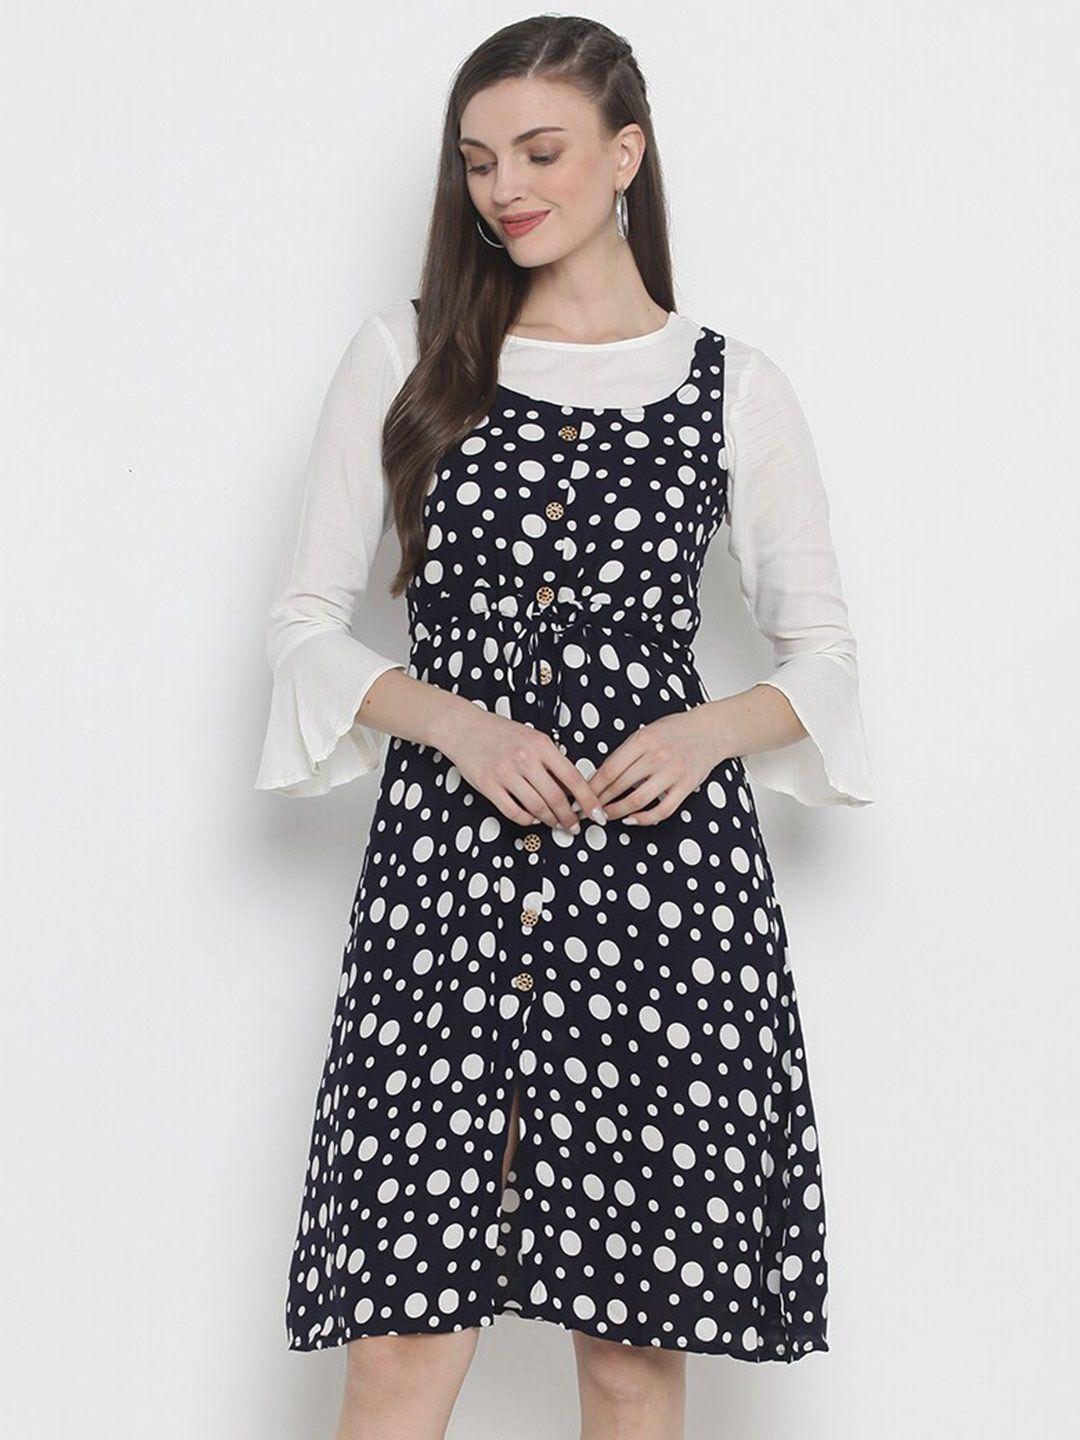 god bless polka dot a-line dress with white crop top